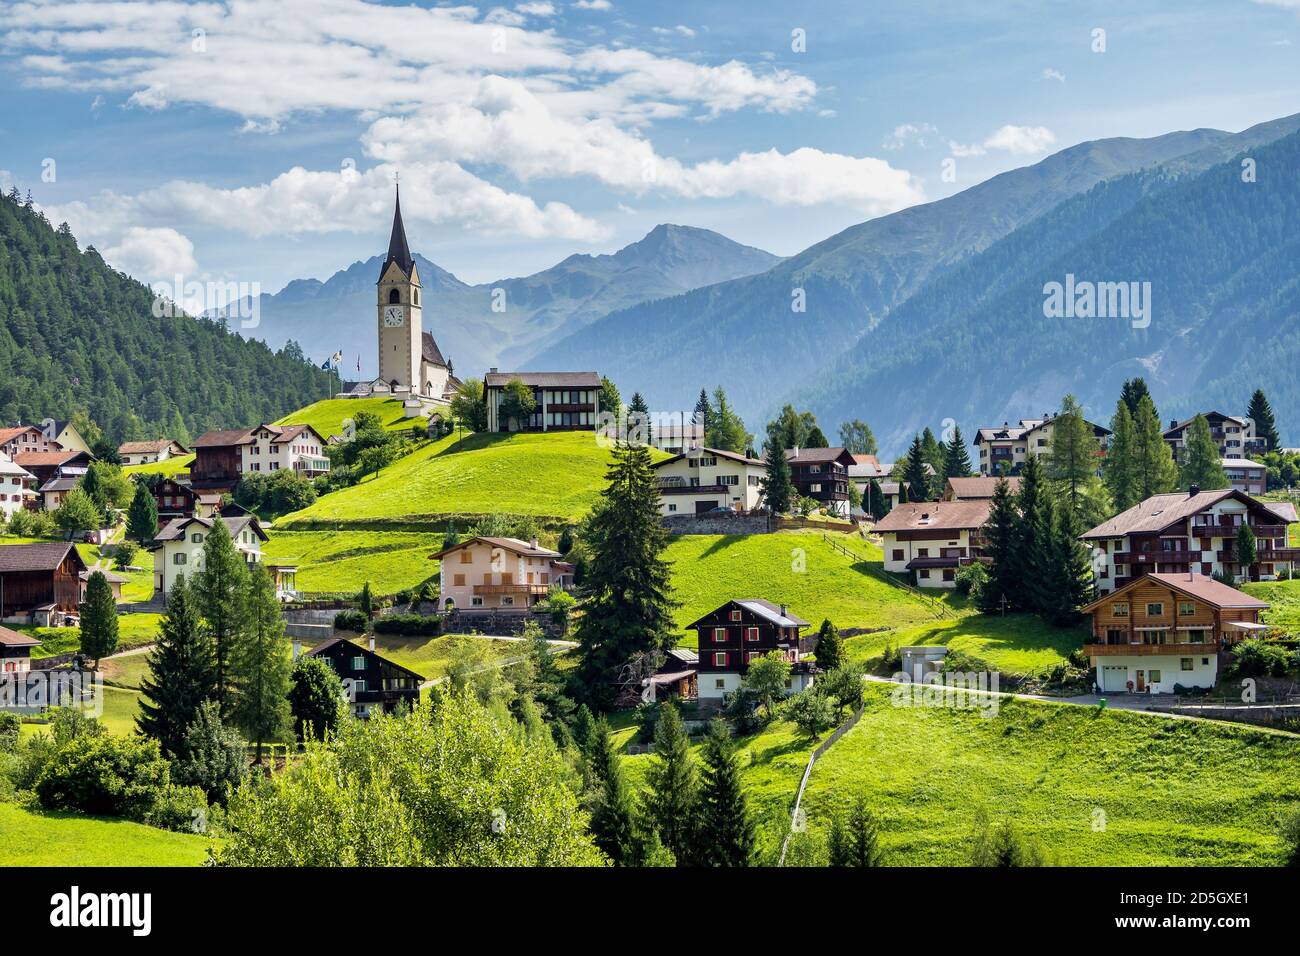 Beautiful Schmitten village at Albula pass in Grisons, Graubuenden, Switzerland with view of houses on green grassy hills, a lovely church on hilltop Stock Photo